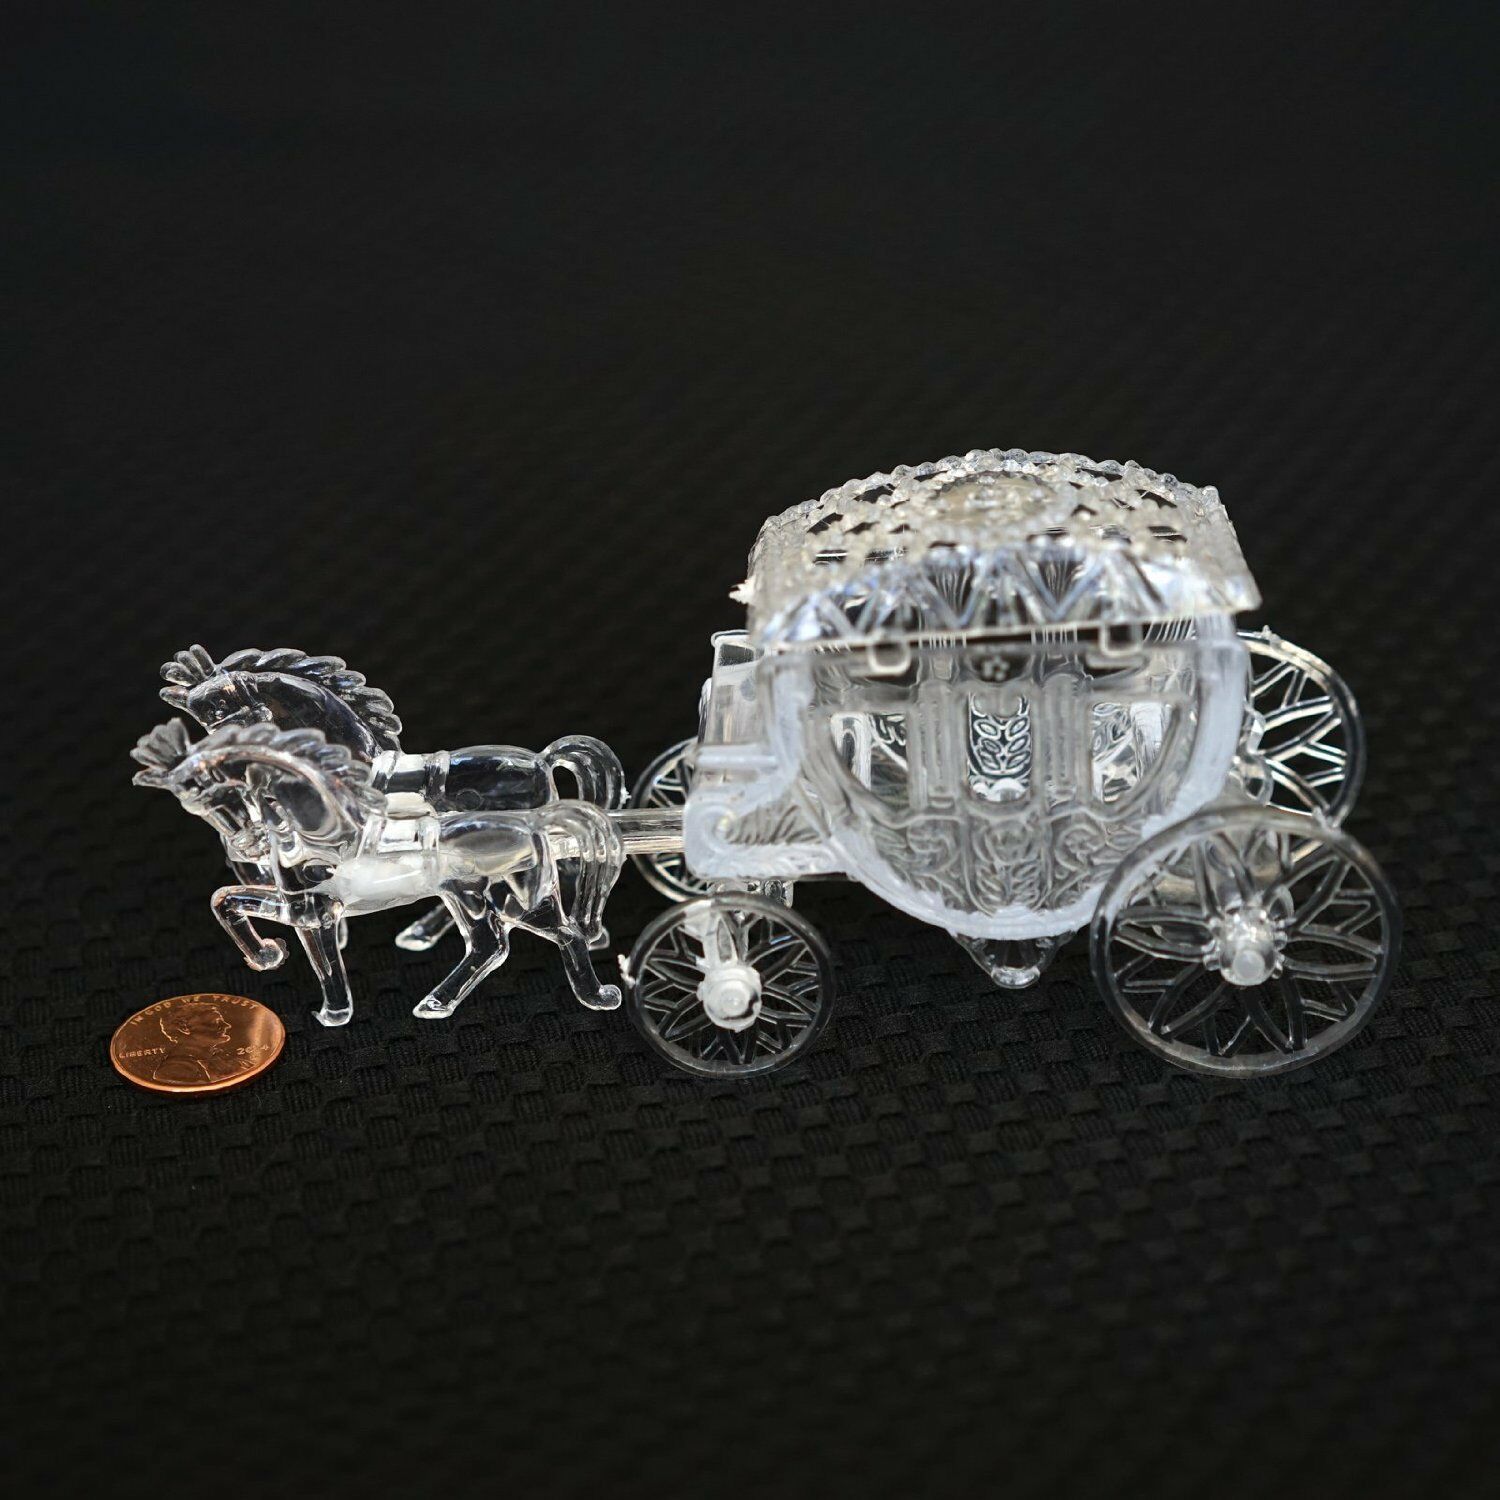 Royal Vintage Cinderella Horse And Carriage Coach Cake Topper Clear